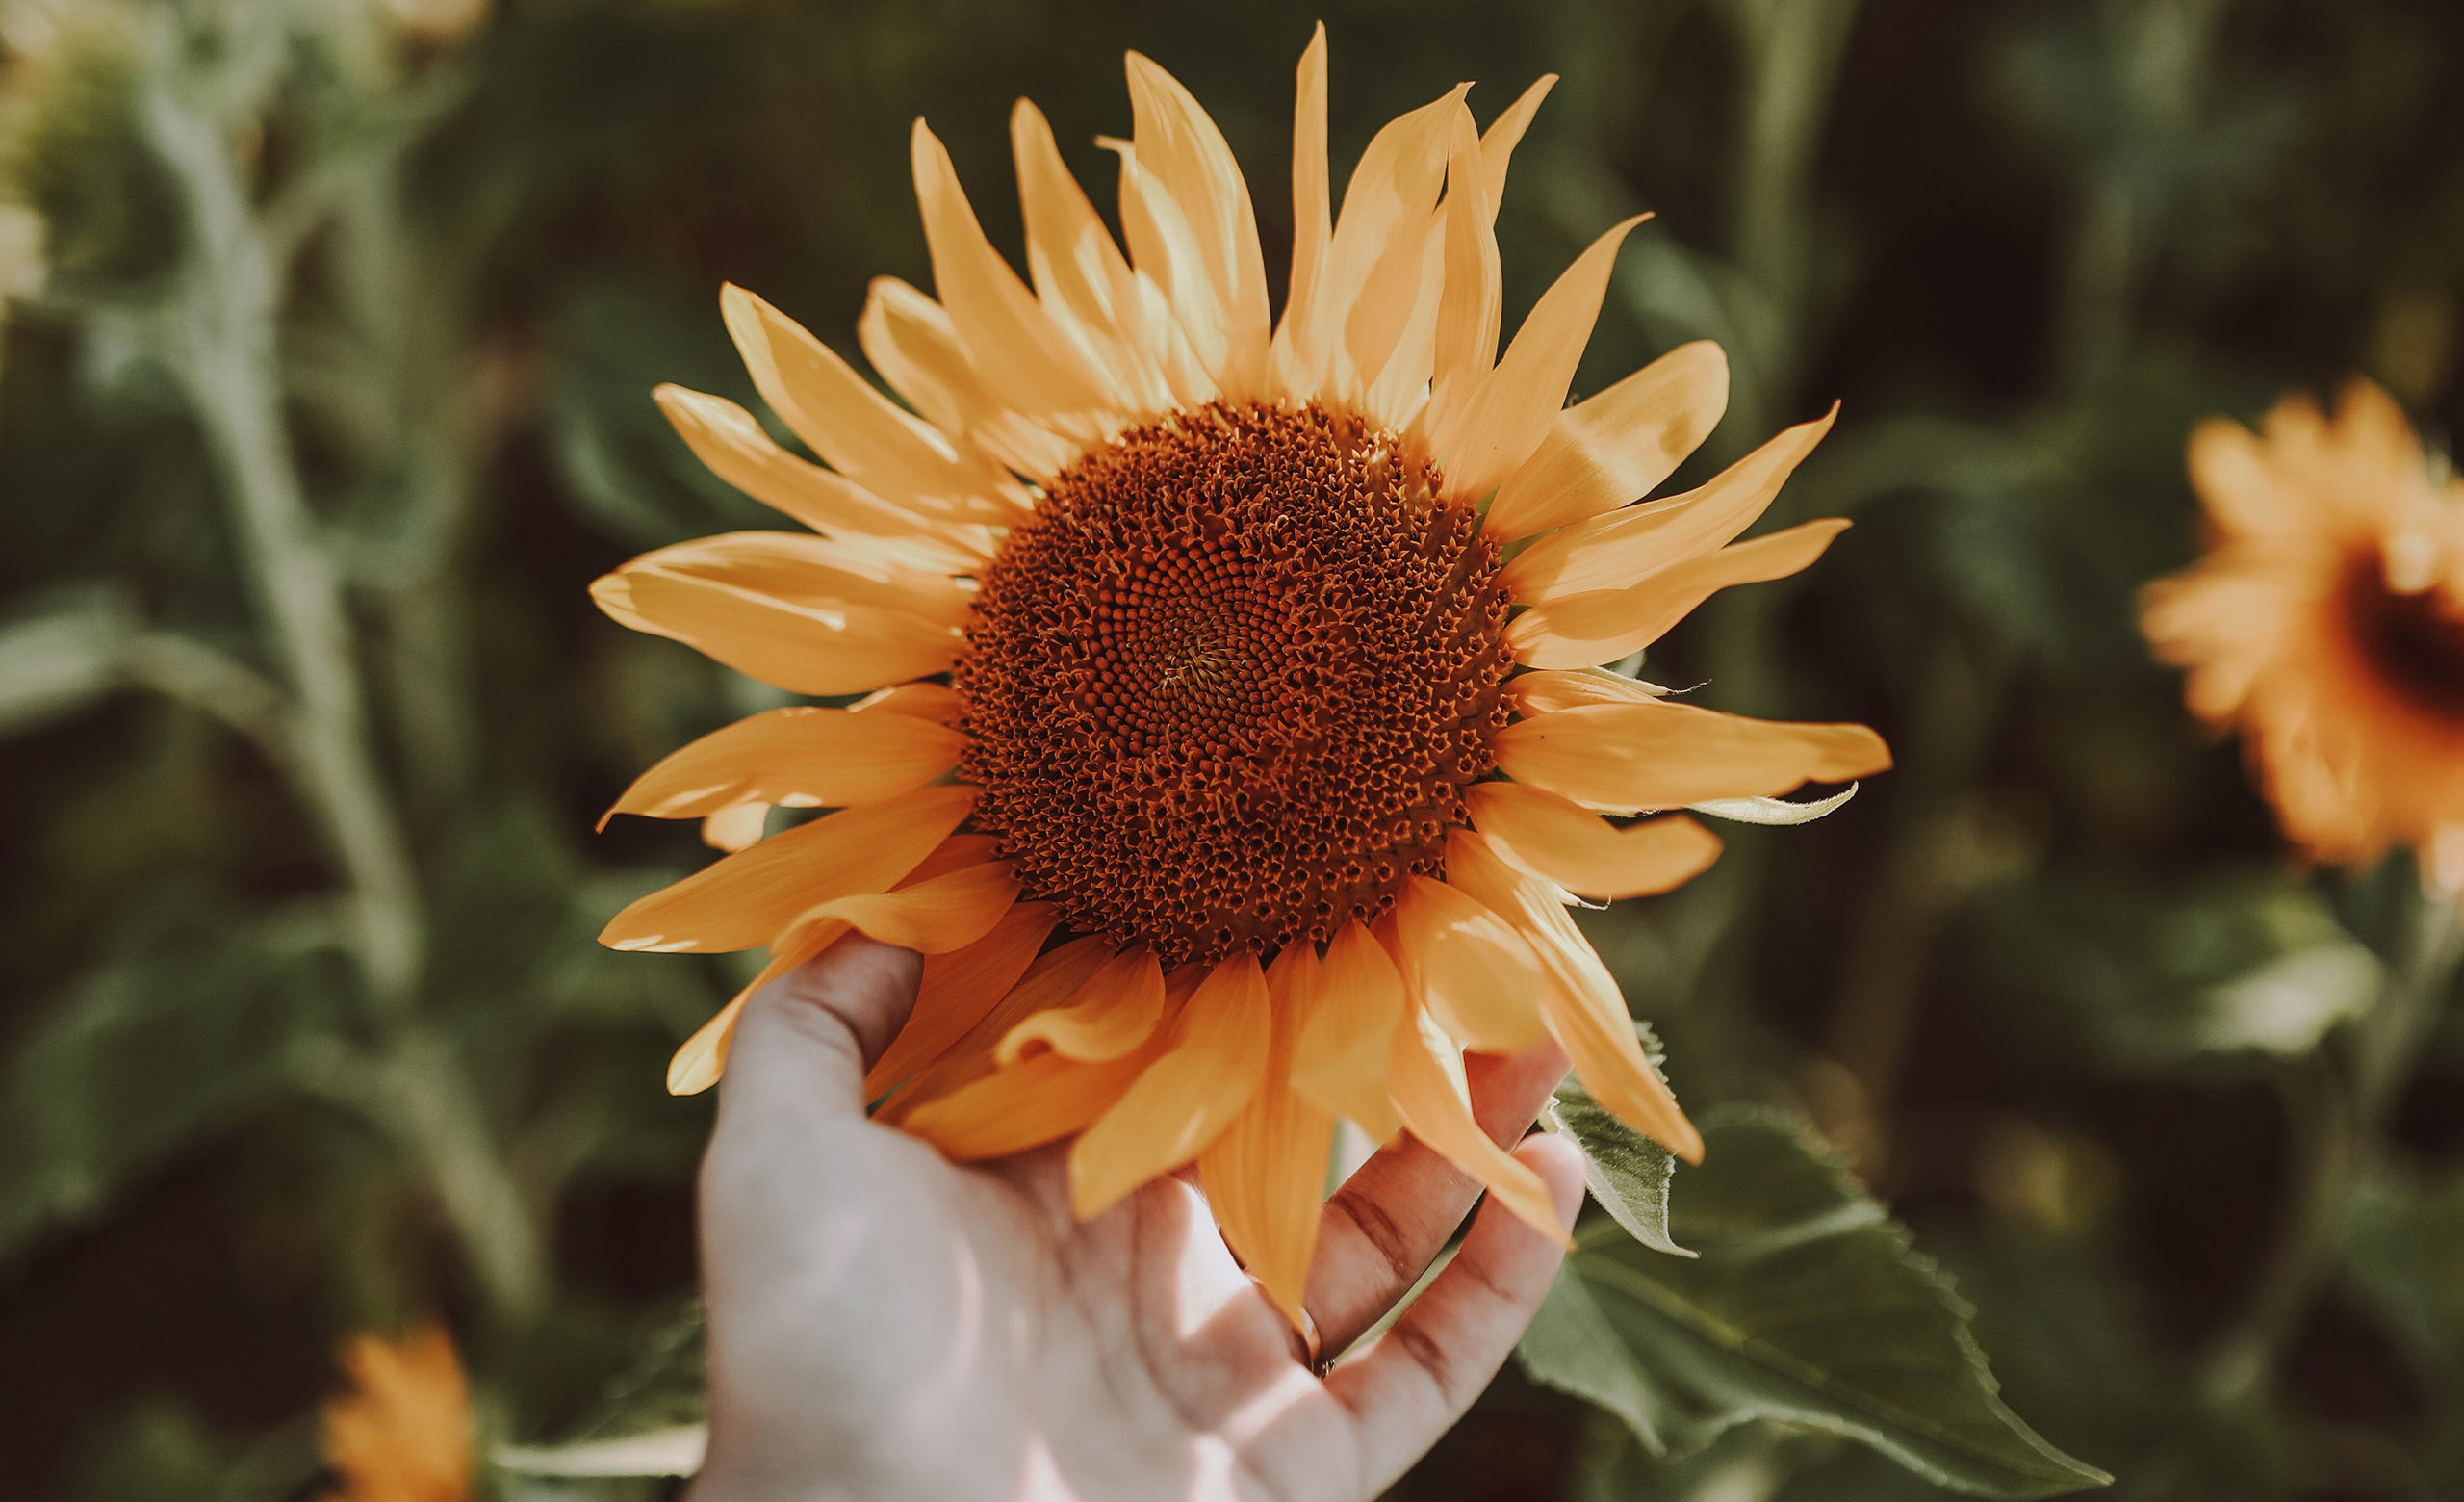 Hand gently cradling a vibrant sunflower, epitomizing the evocative power of sensory detail in narrating life stories.